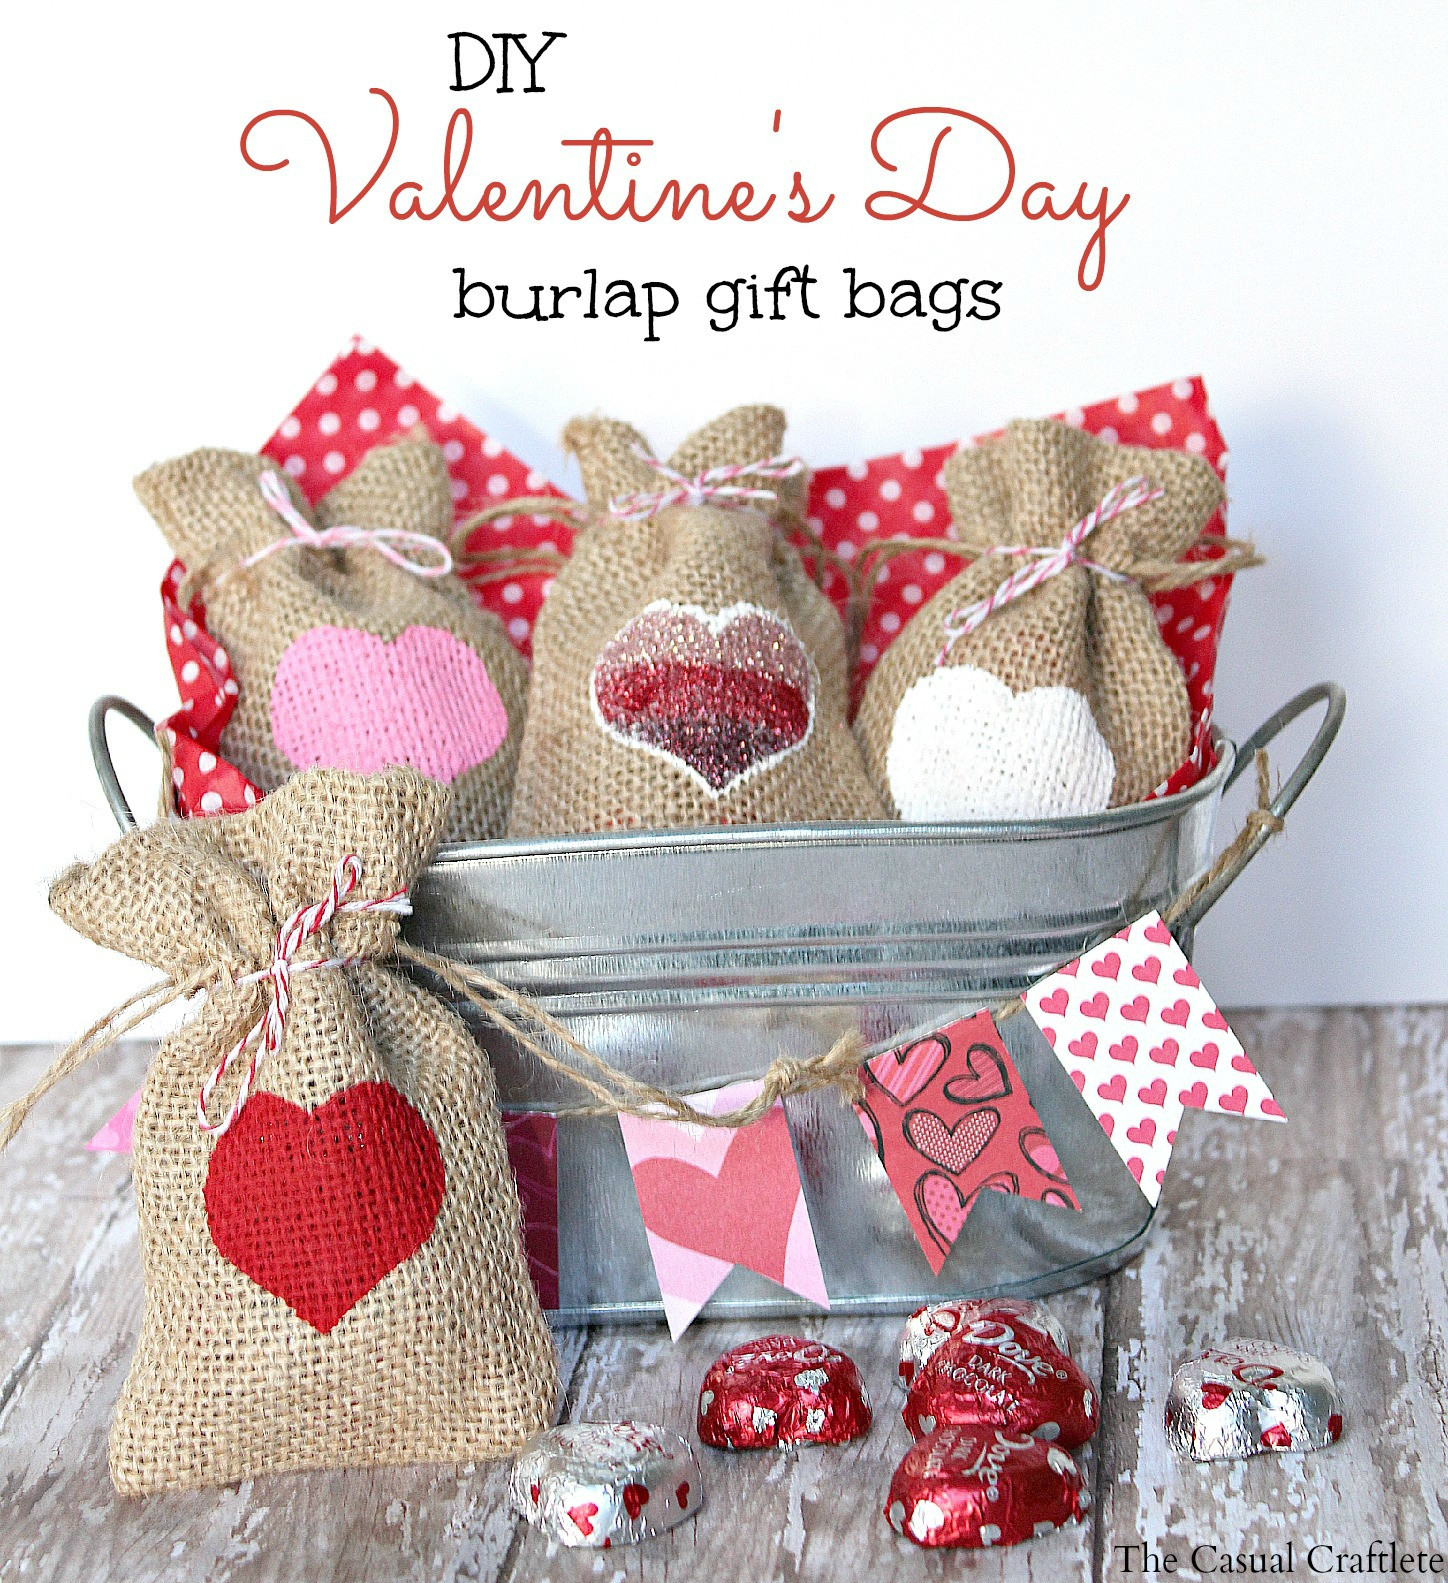 Valentines Day Homemade Gift Best Of Diy Valentine S Day Burlap Gift Bags